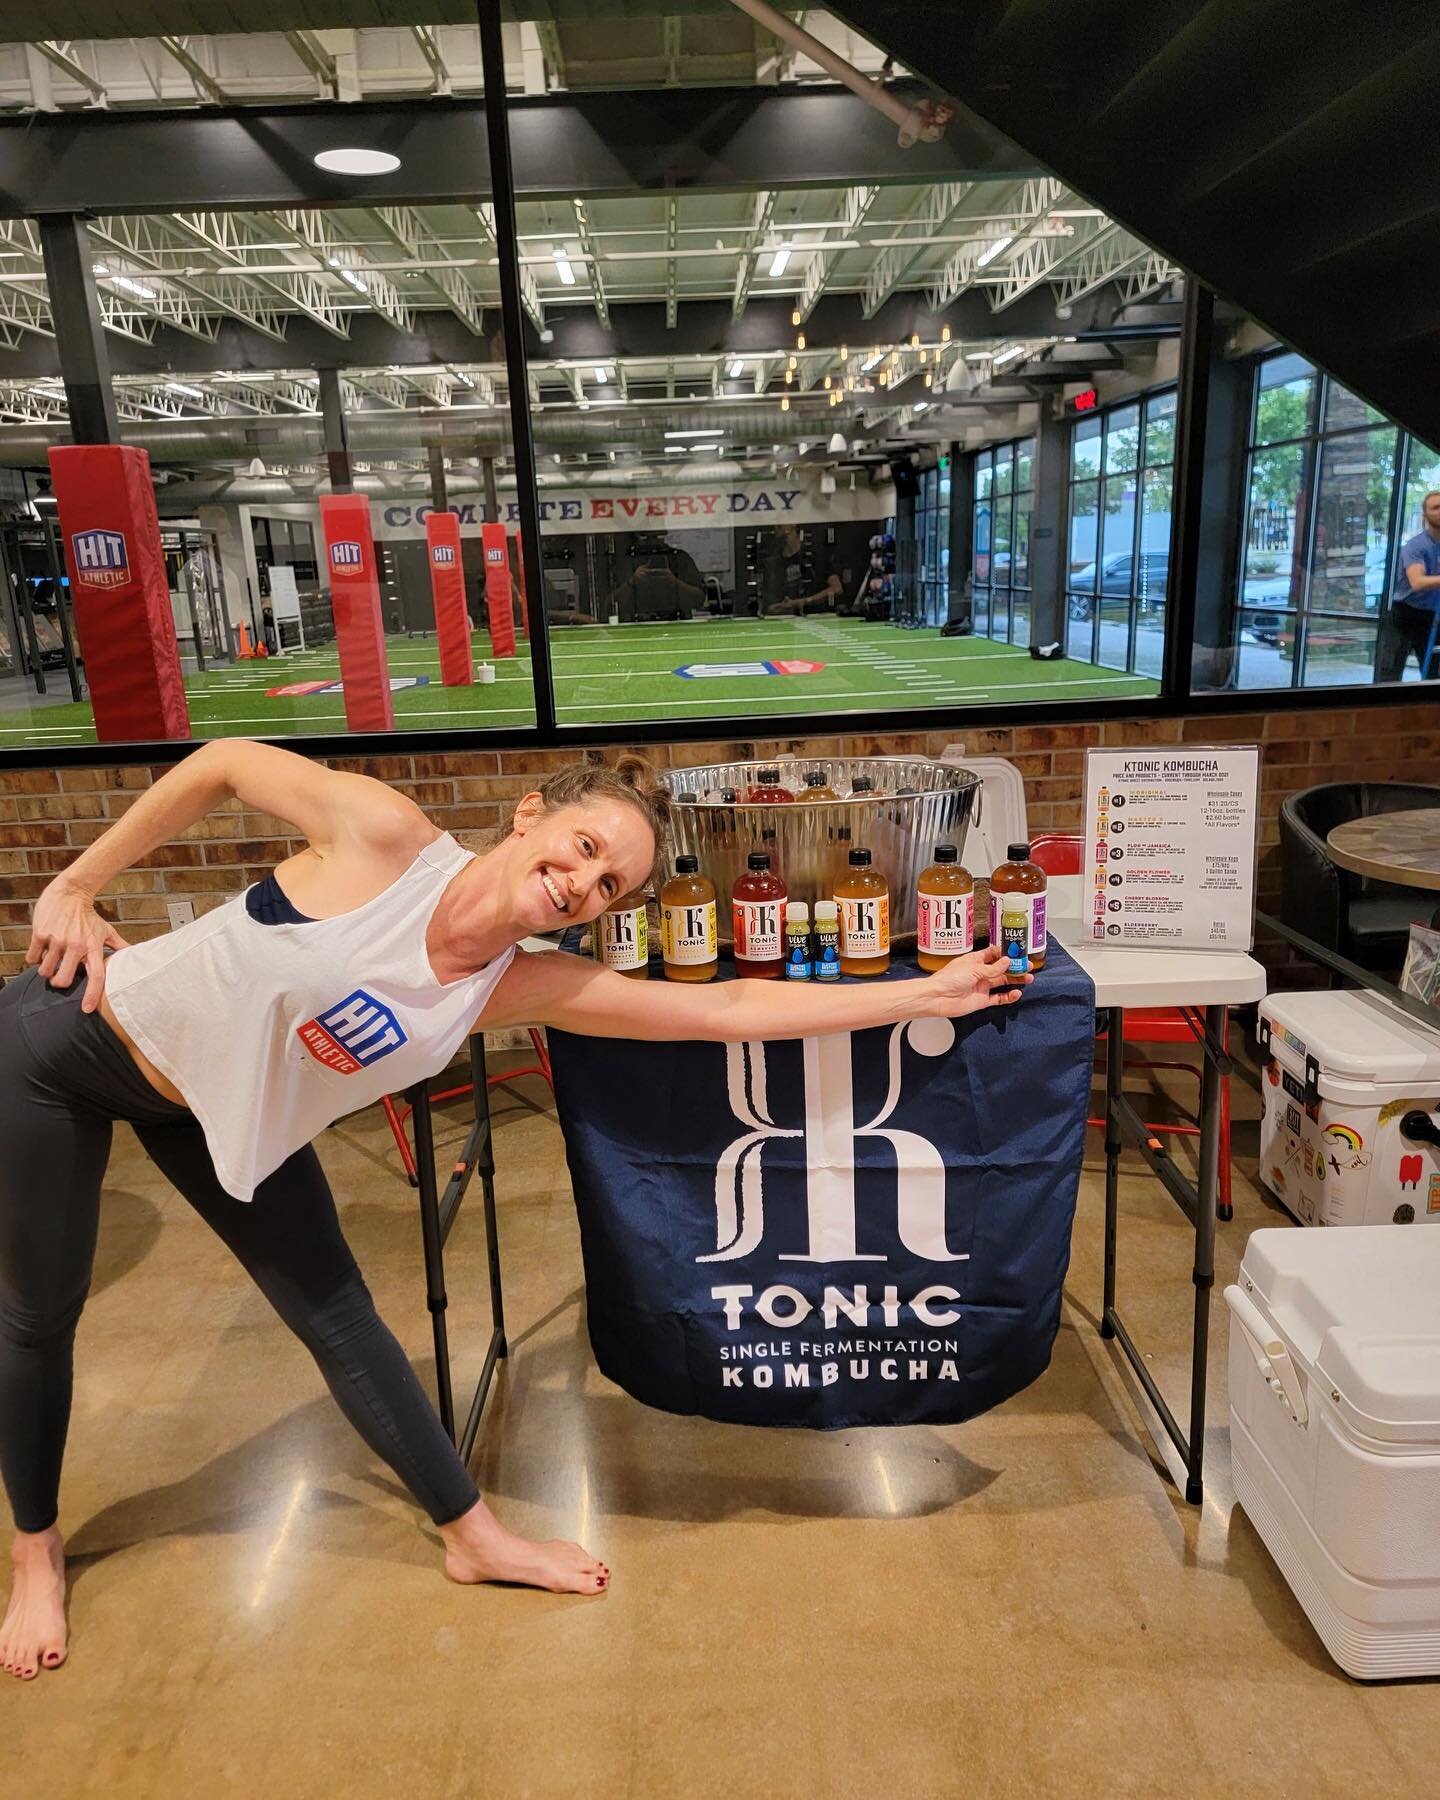 Yoga session, on and poppin&rsquo; at HIT Athletic! And this rain! 😍😍🌧 #hitathletic #austintx #booch #zen #yogaflow